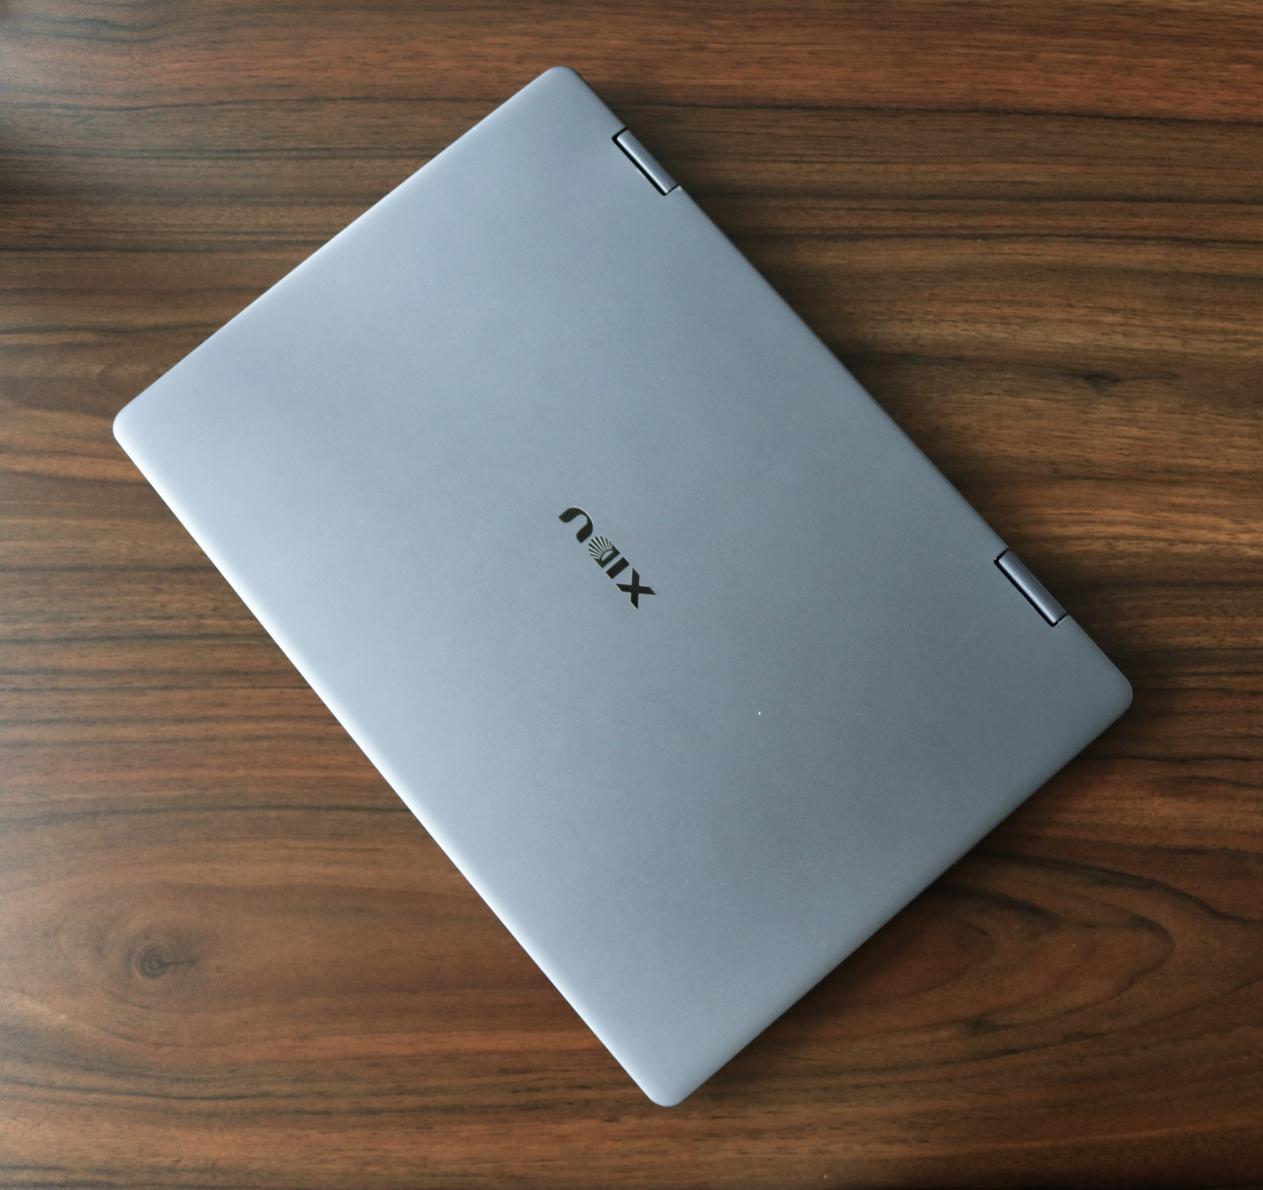 XIDU Philbook Max Review - Compact and Cost-effective Laptop